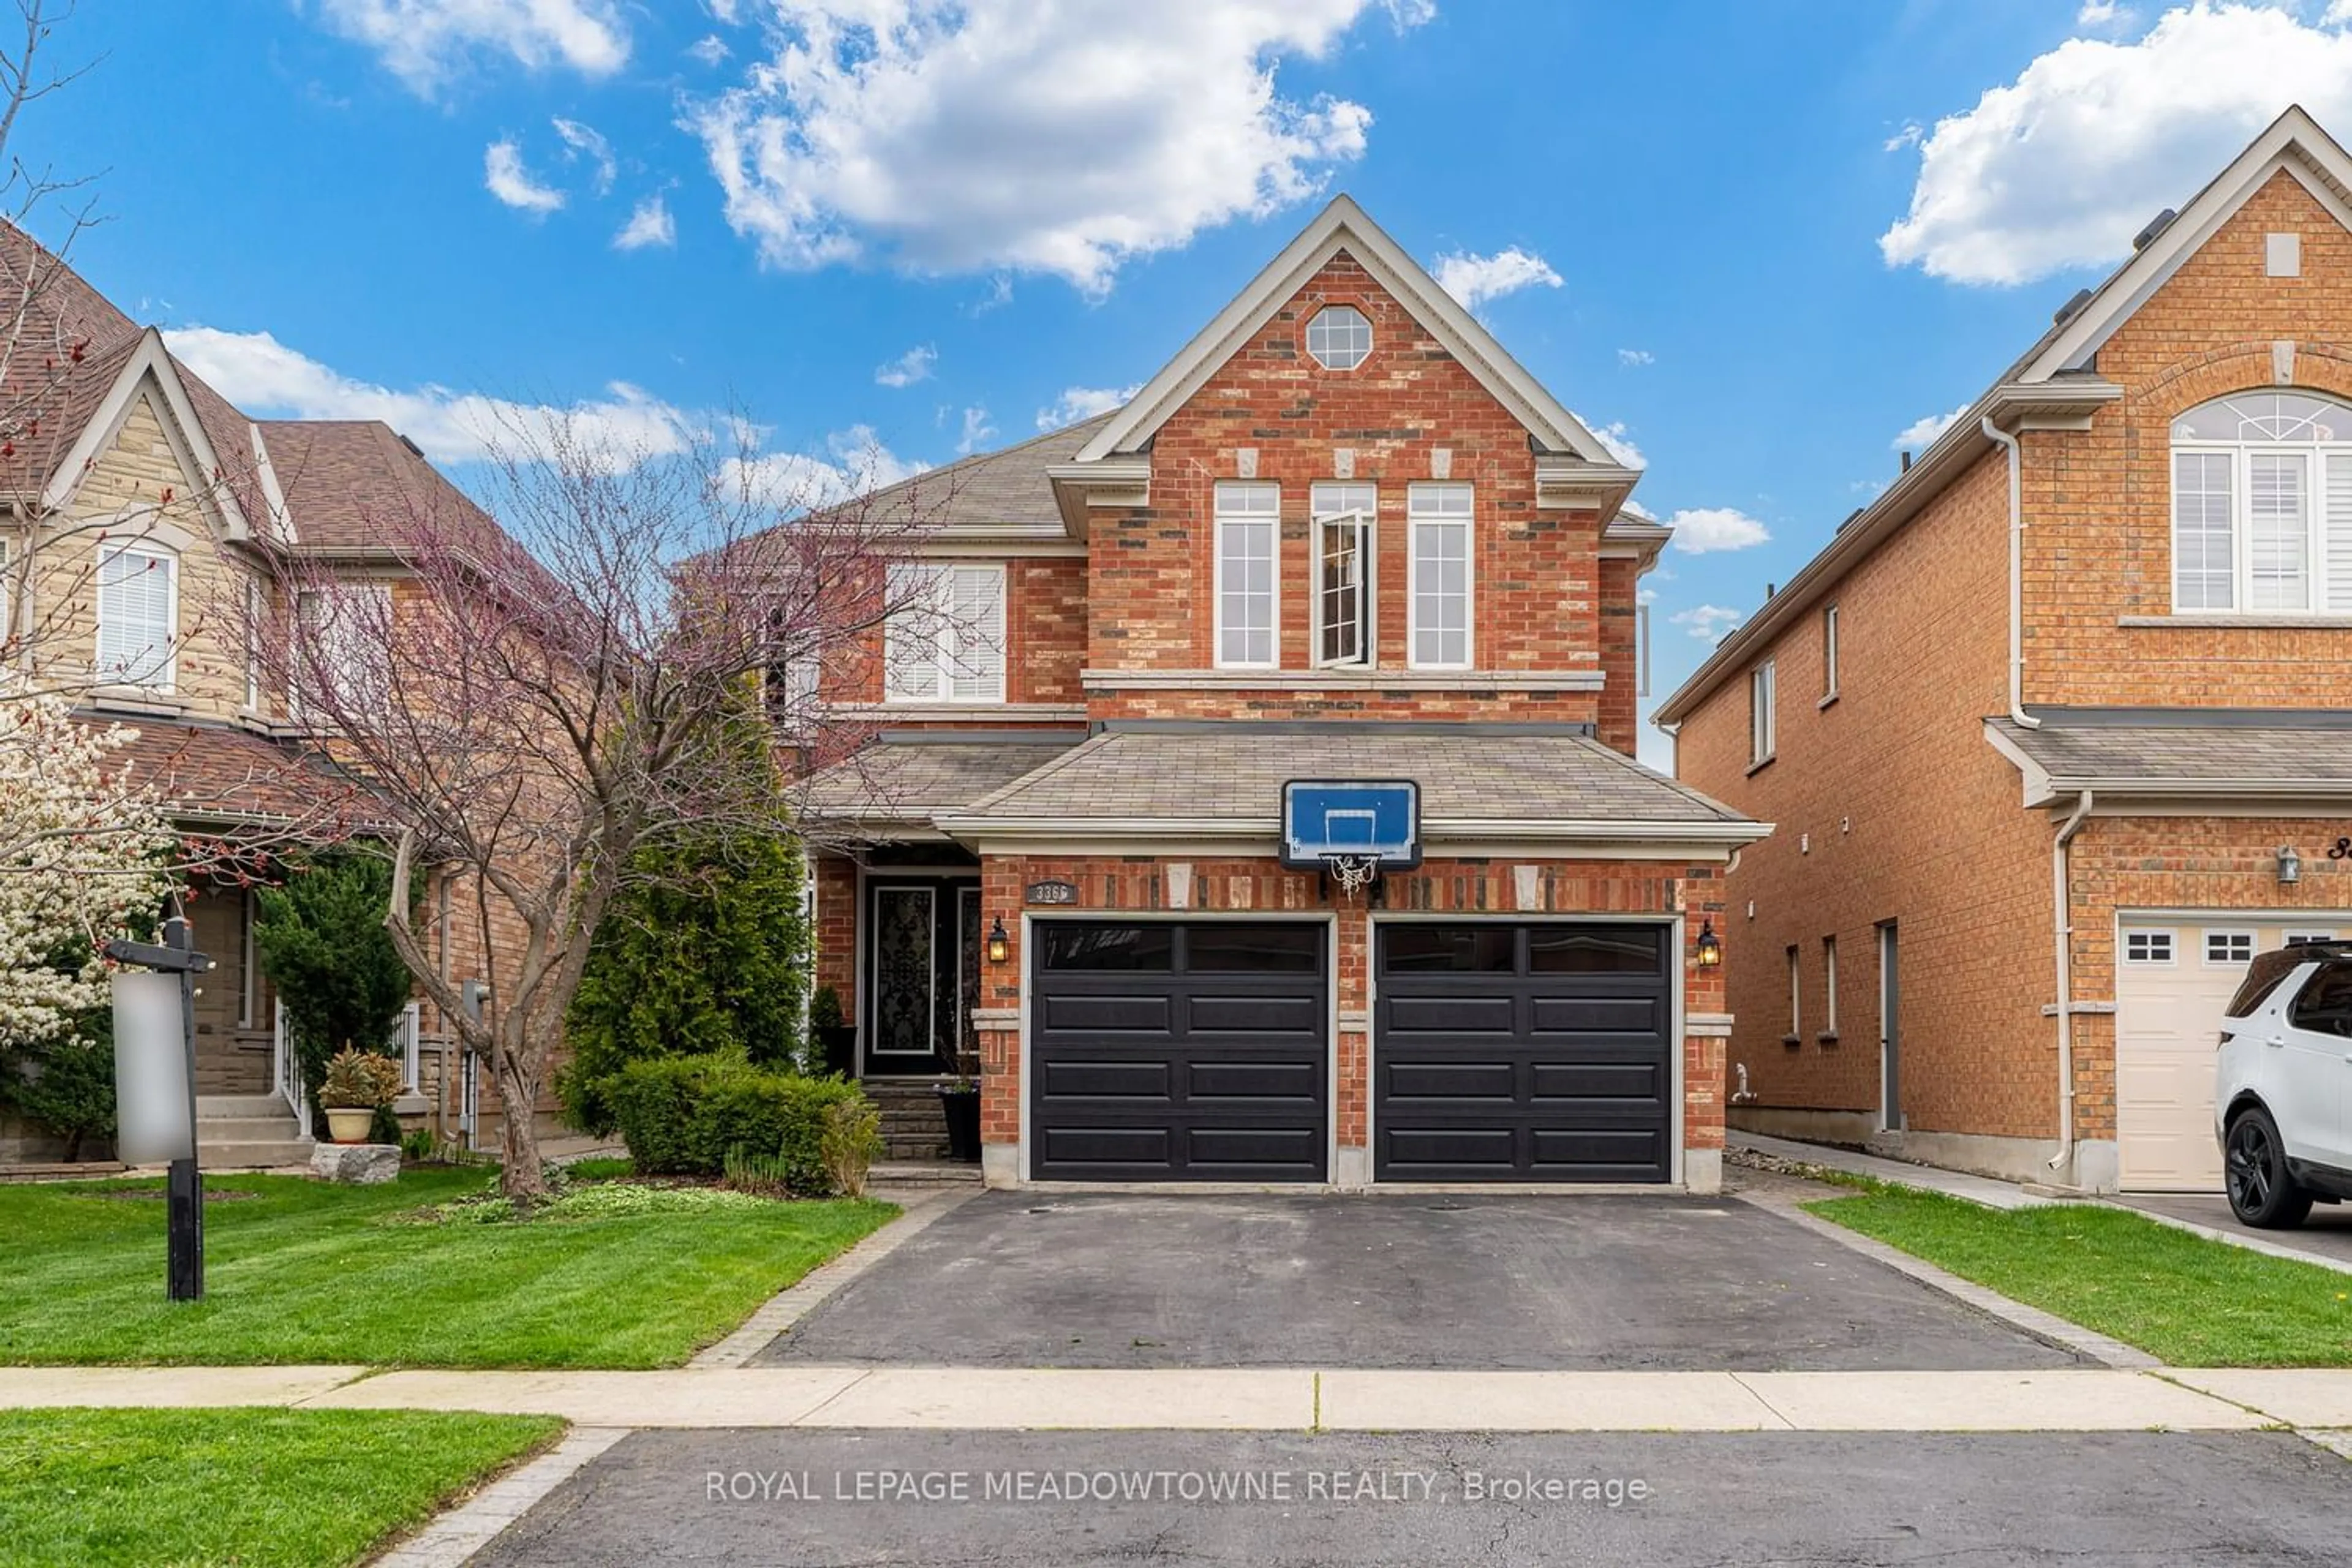 Home with brick exterior material for 3366 Trilogy Tr, Mississauga Ontario L5M 0K3